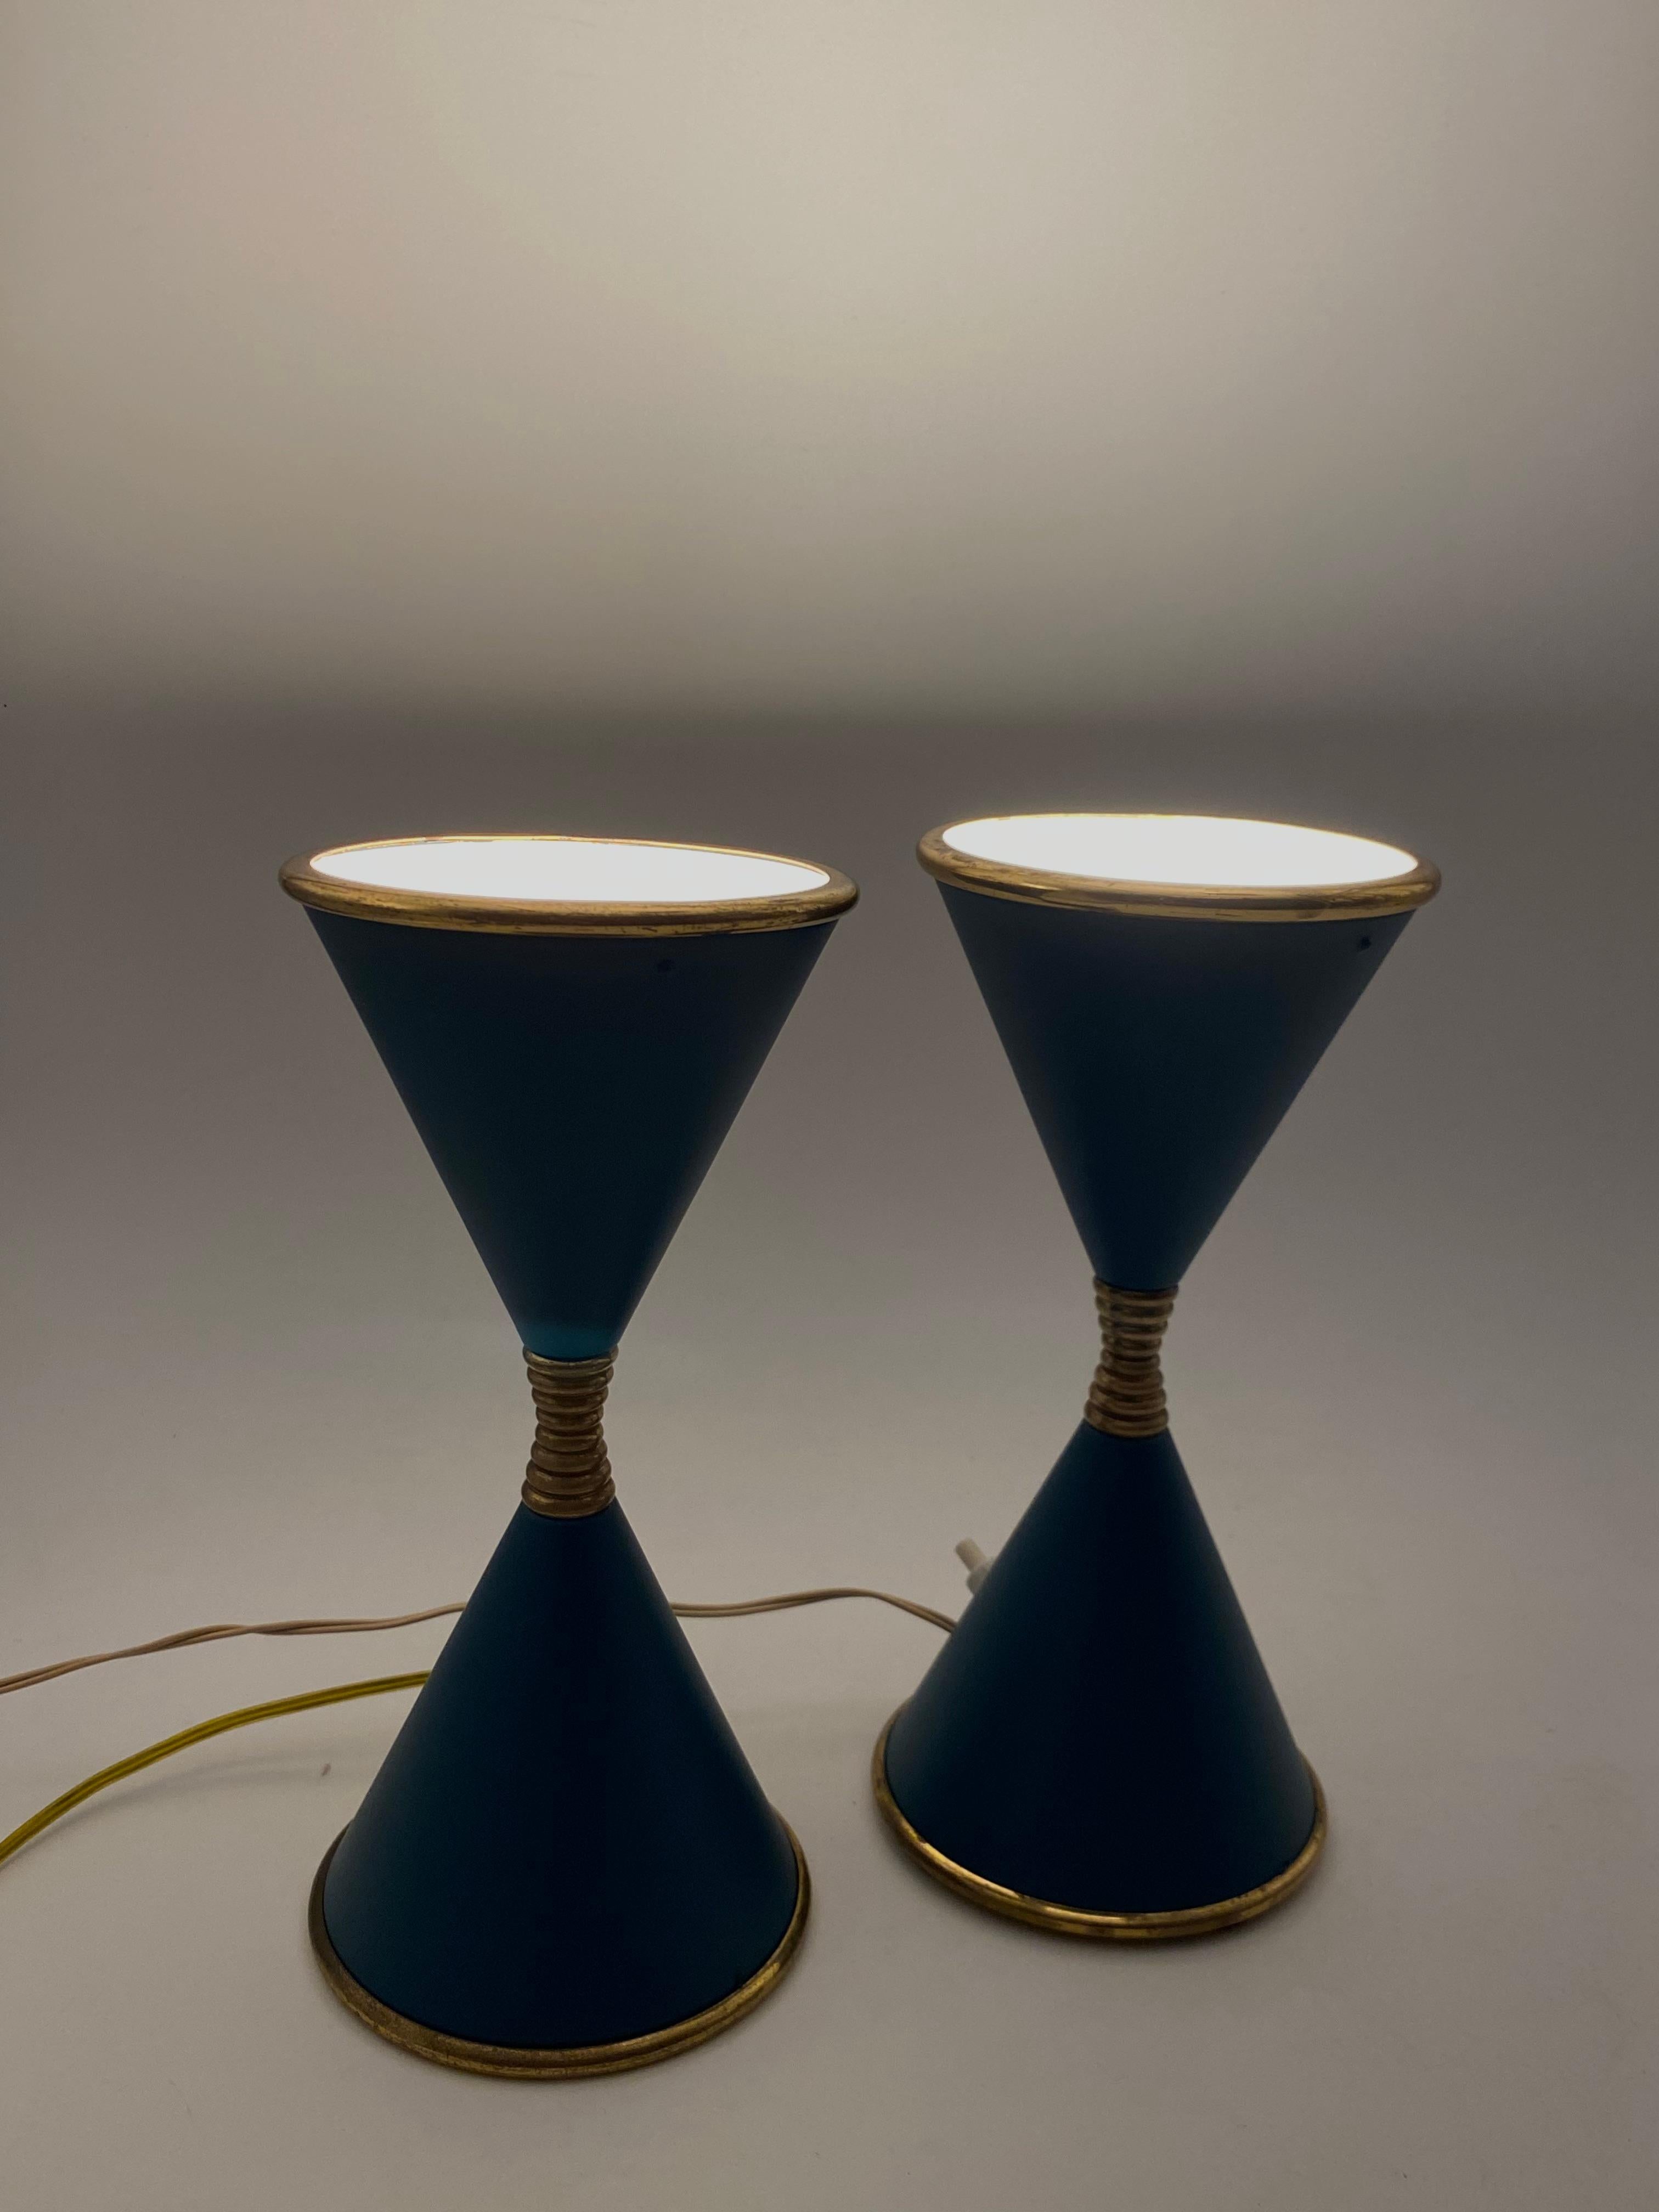 Angelo Lelii, Set of 2 'Clessidra' Table Lamps, Arredoluce, Milan Italy, 1960 For Sale 9